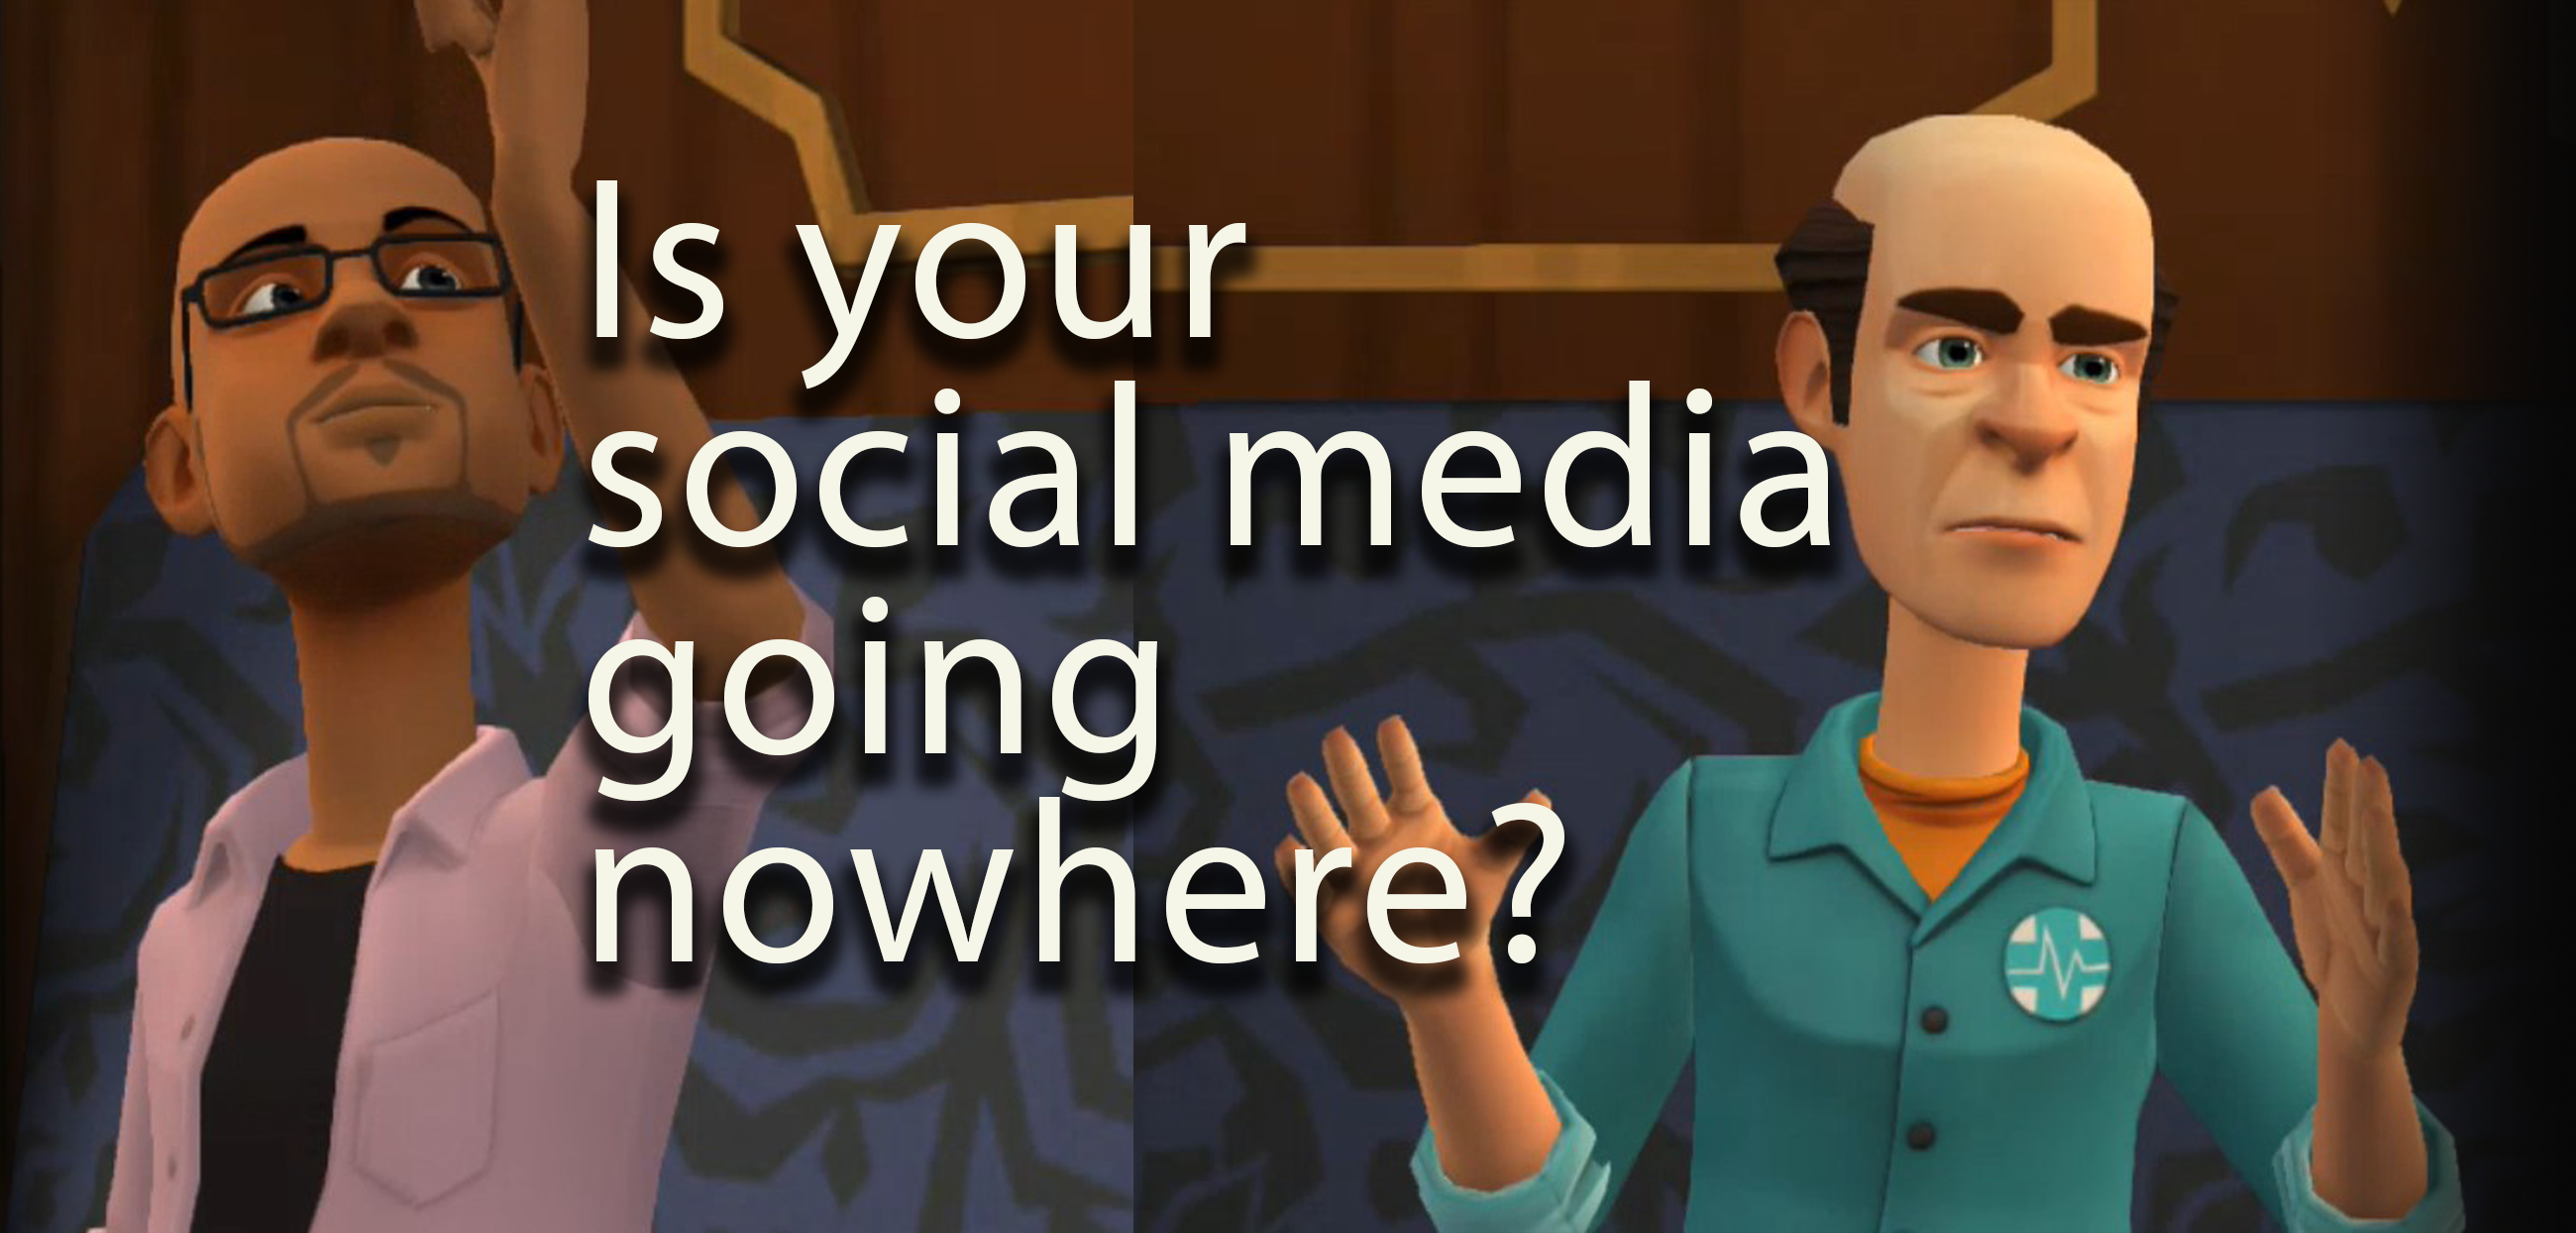 Is your social media going nowhere?